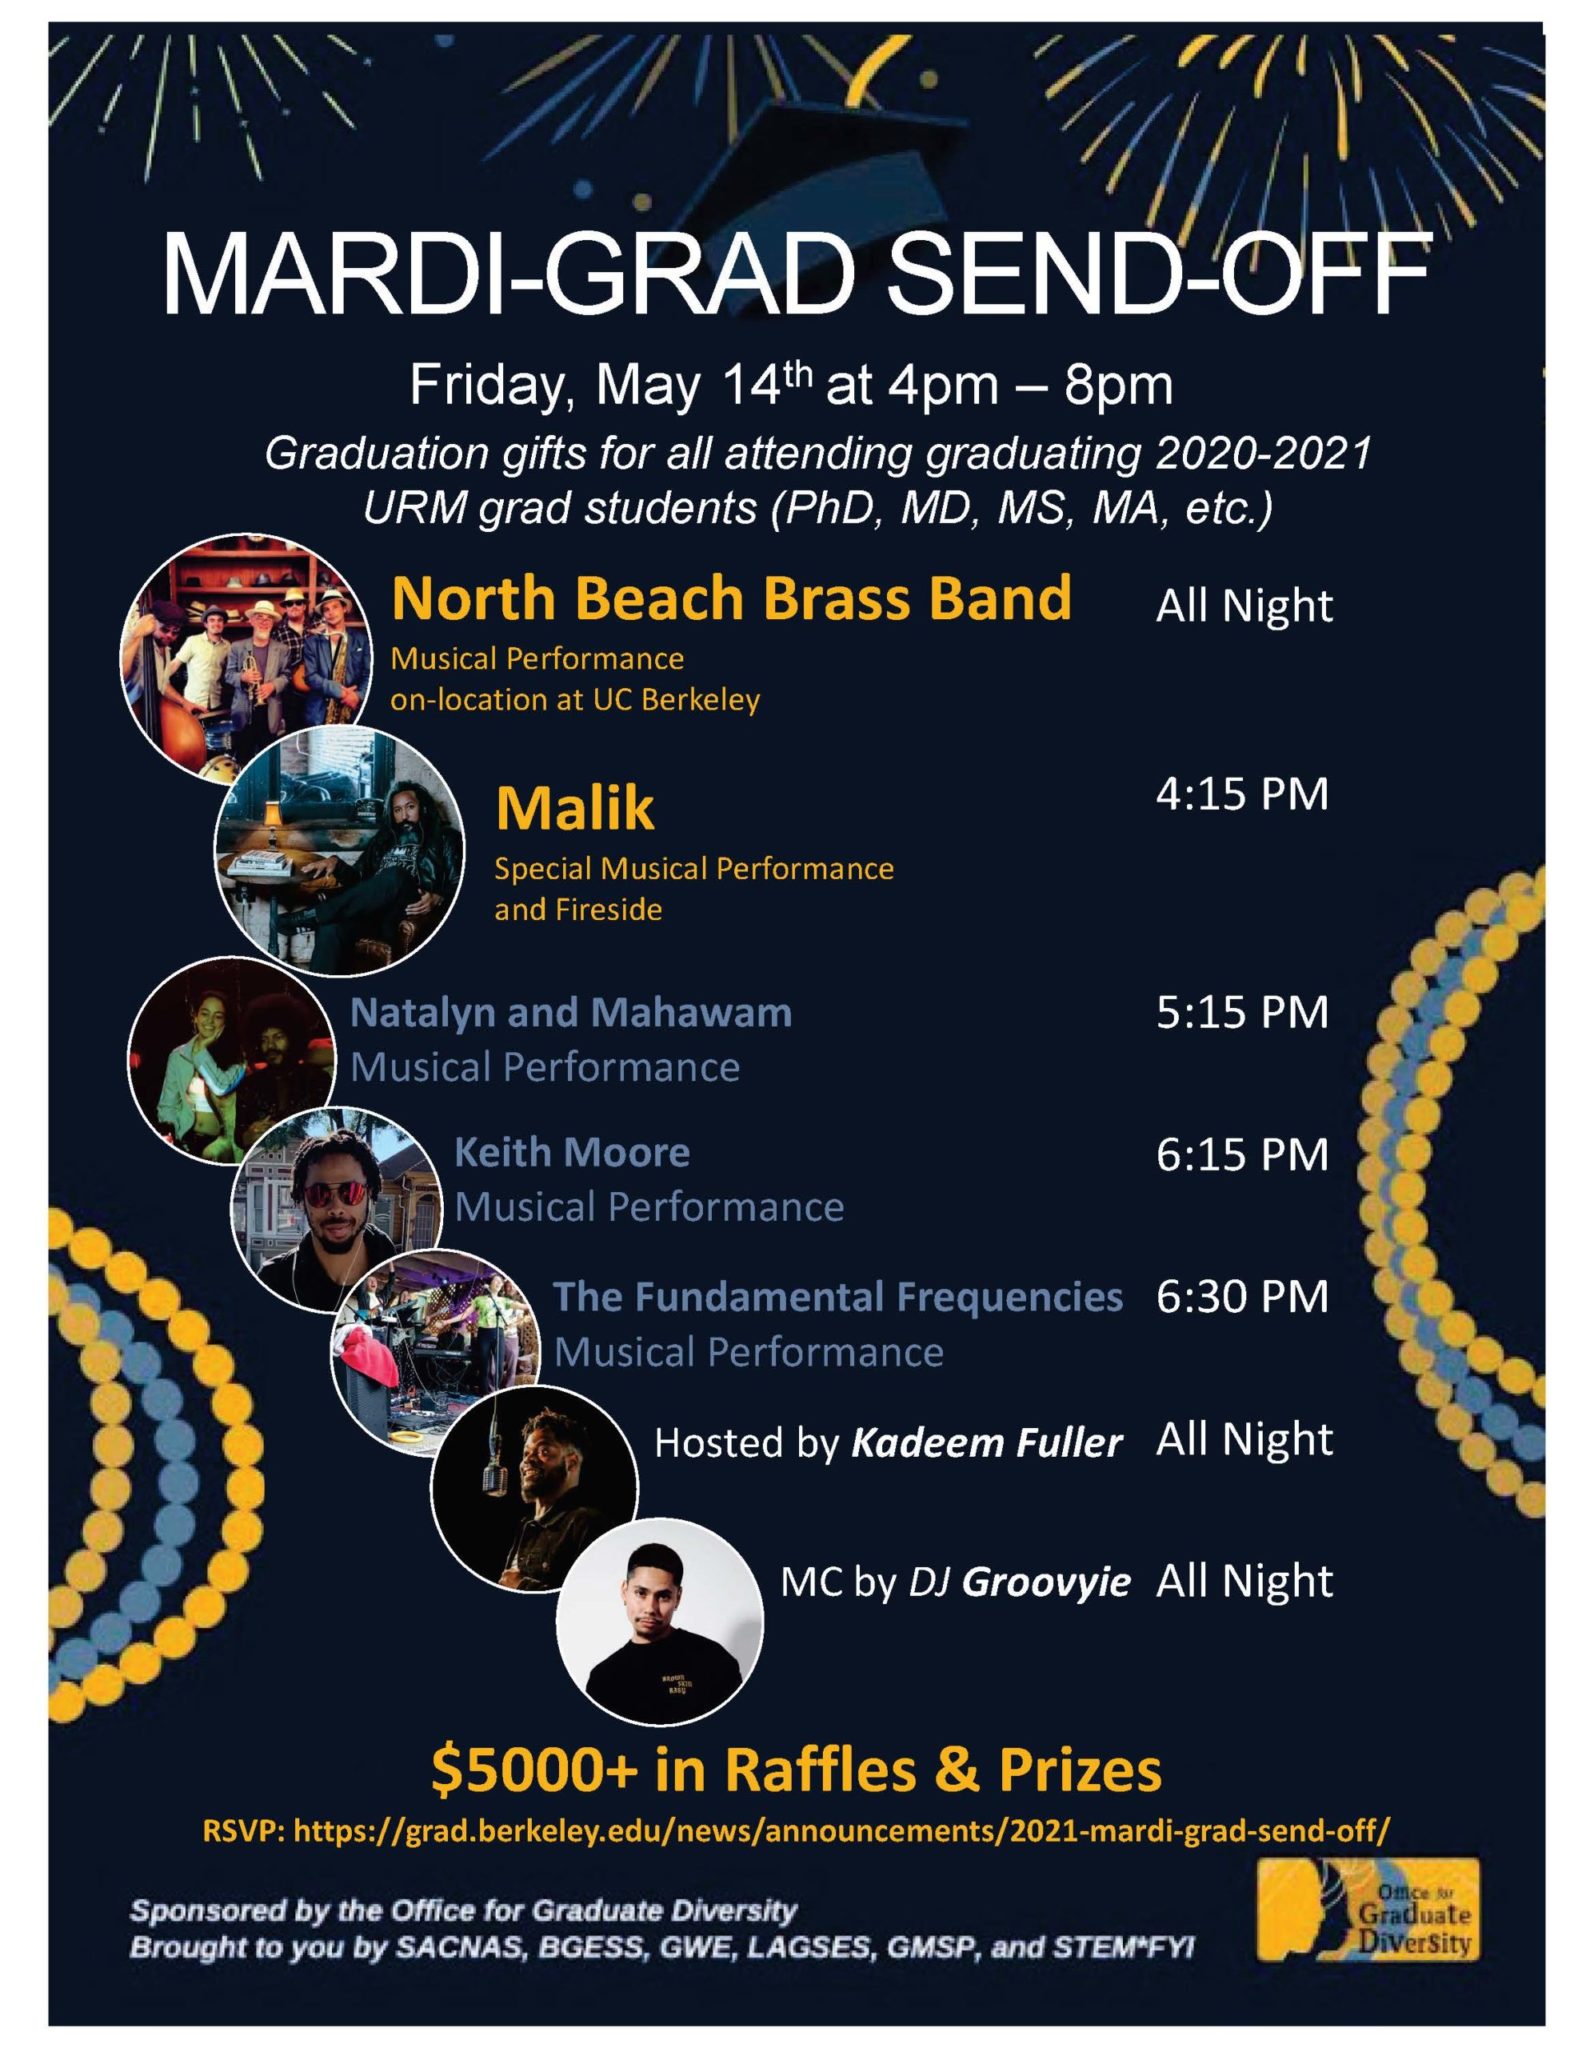 Mardi-Grad Send-Off Friday, May 14 from 4-8pm Graduation gifts for all attending graduating 2020-21 URM grad students (PhD, MD, MS, MA, etc.) North Beach Brass Band (all night) Malik 4:15 p.m. Natalyn and Mahawam 5:15 p.m. Keith Moore 6:15 p.m. The Fundamental Frequencies 6:30 p.m. Hosted by Kadeem Full (all night) MC by DJ Groovyie (all night) $5,000 in Raffles and Prizes Sponsored by the Office for Graduate Diversity